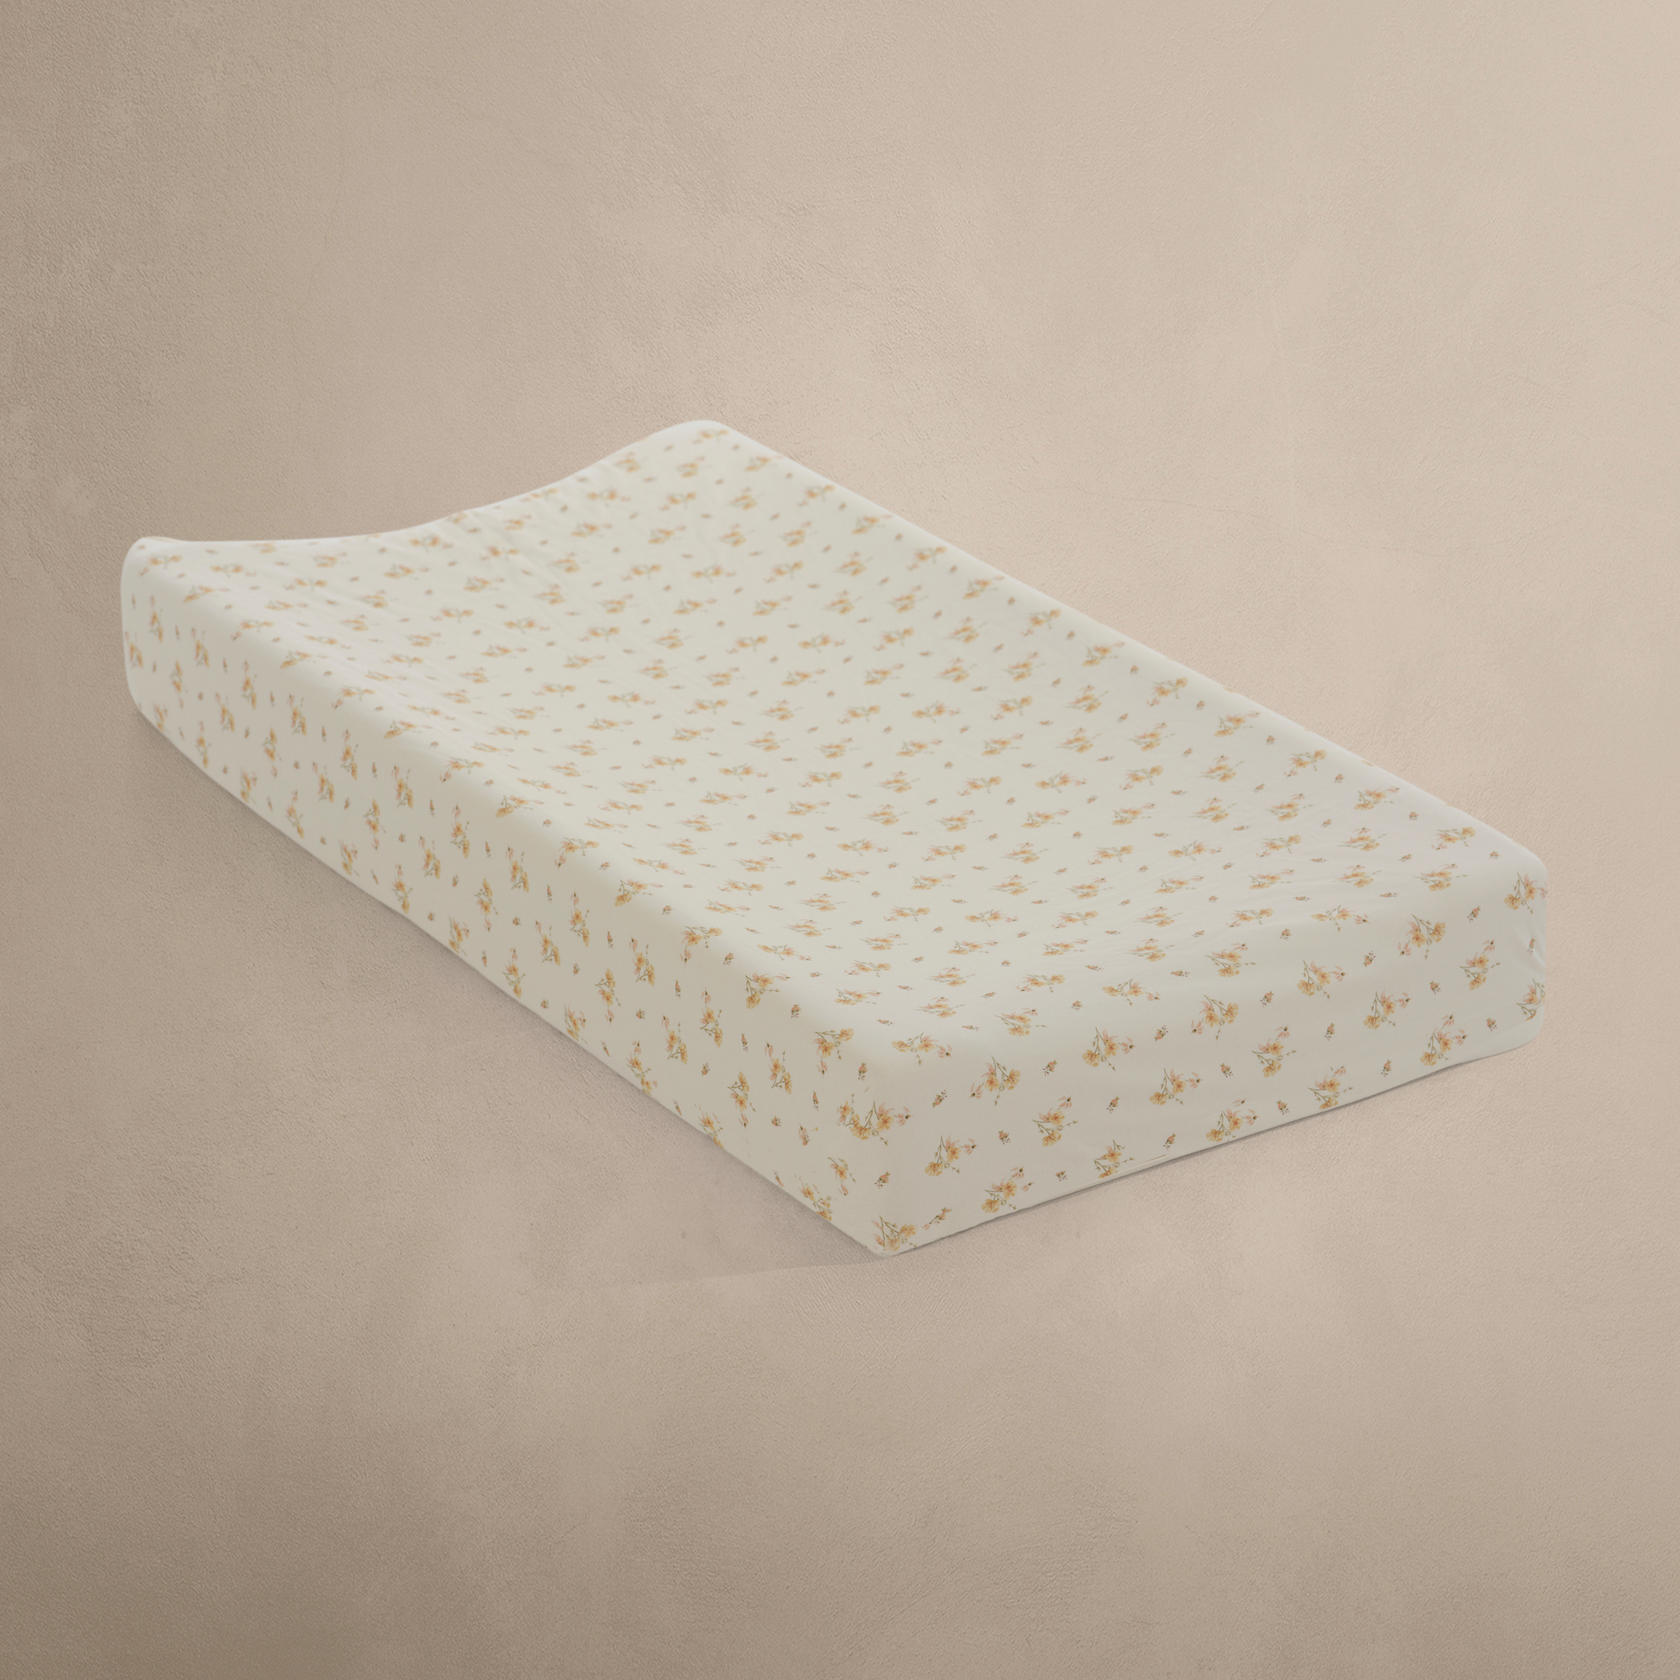 'Dainty Floral' Changing Pad Cover - Twinkle Twinkle Little One